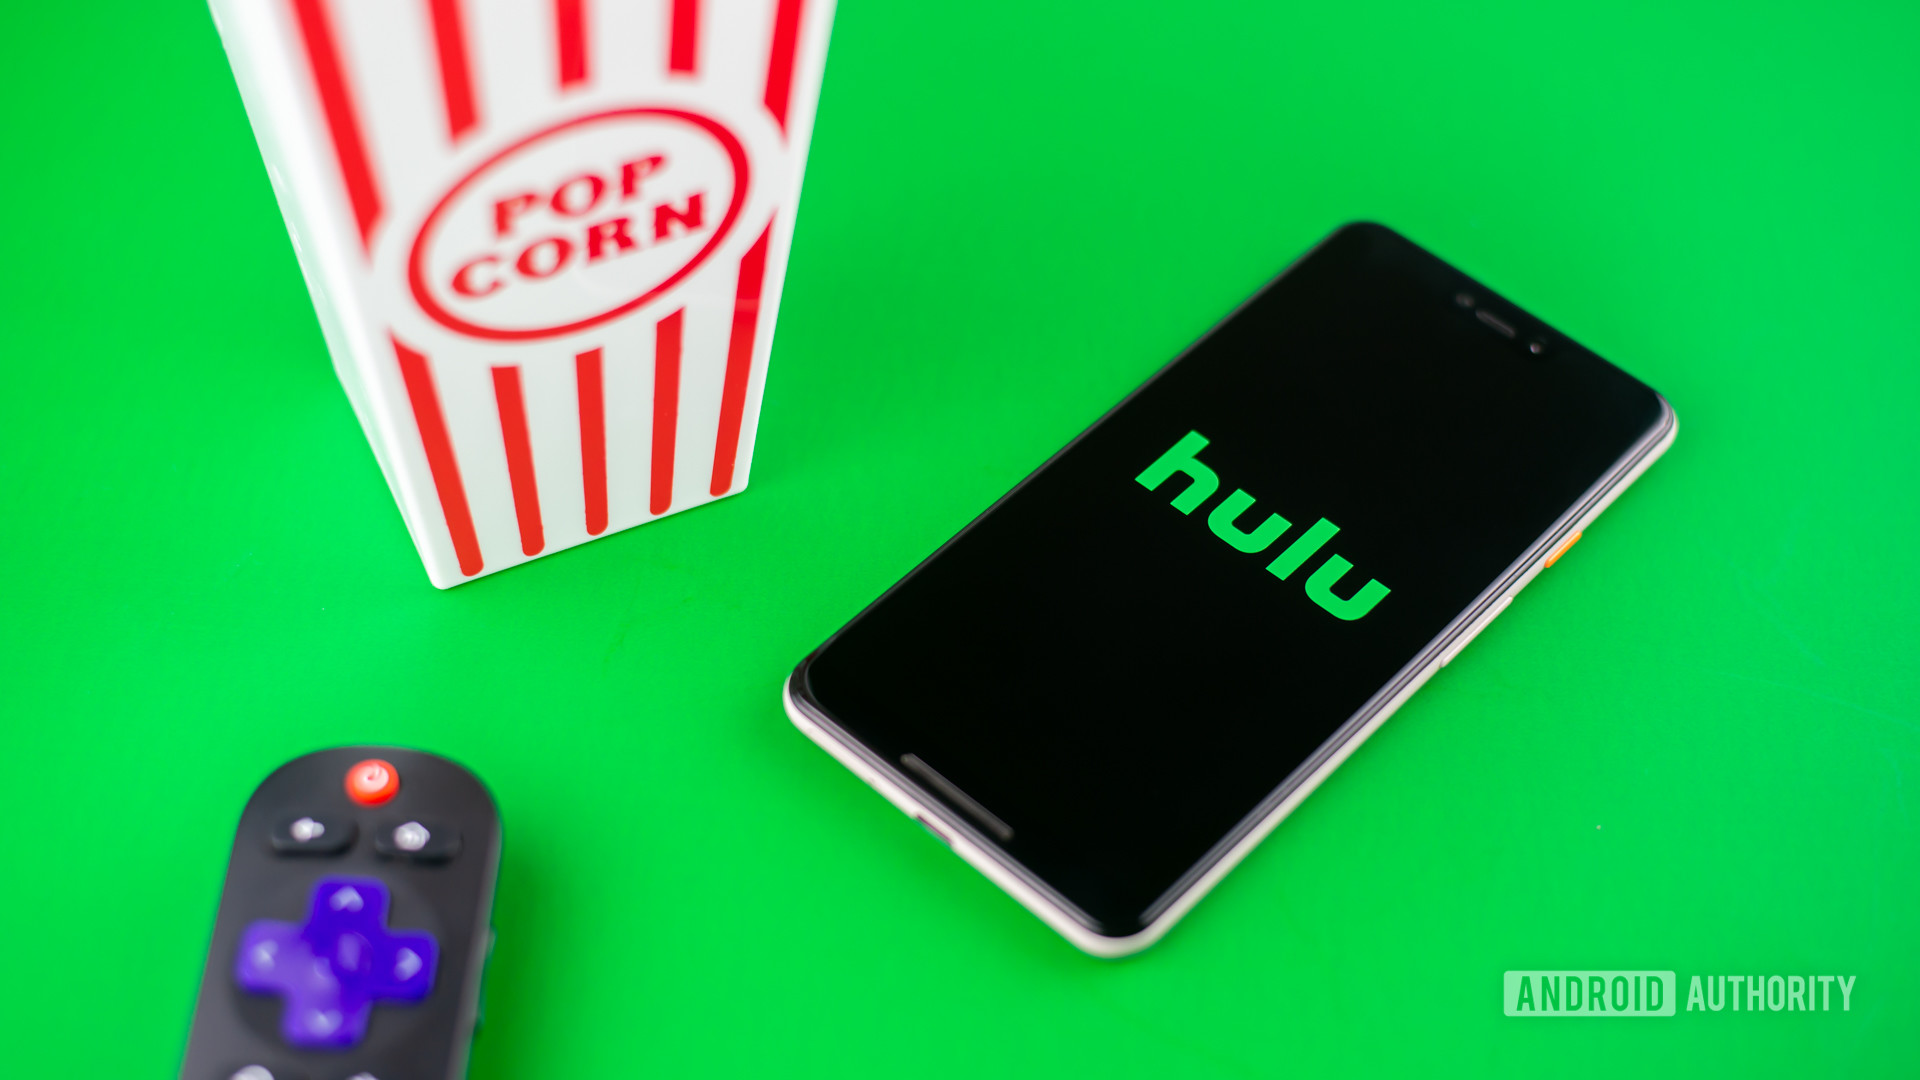 Hulu stock photo green background 1 video streaming services